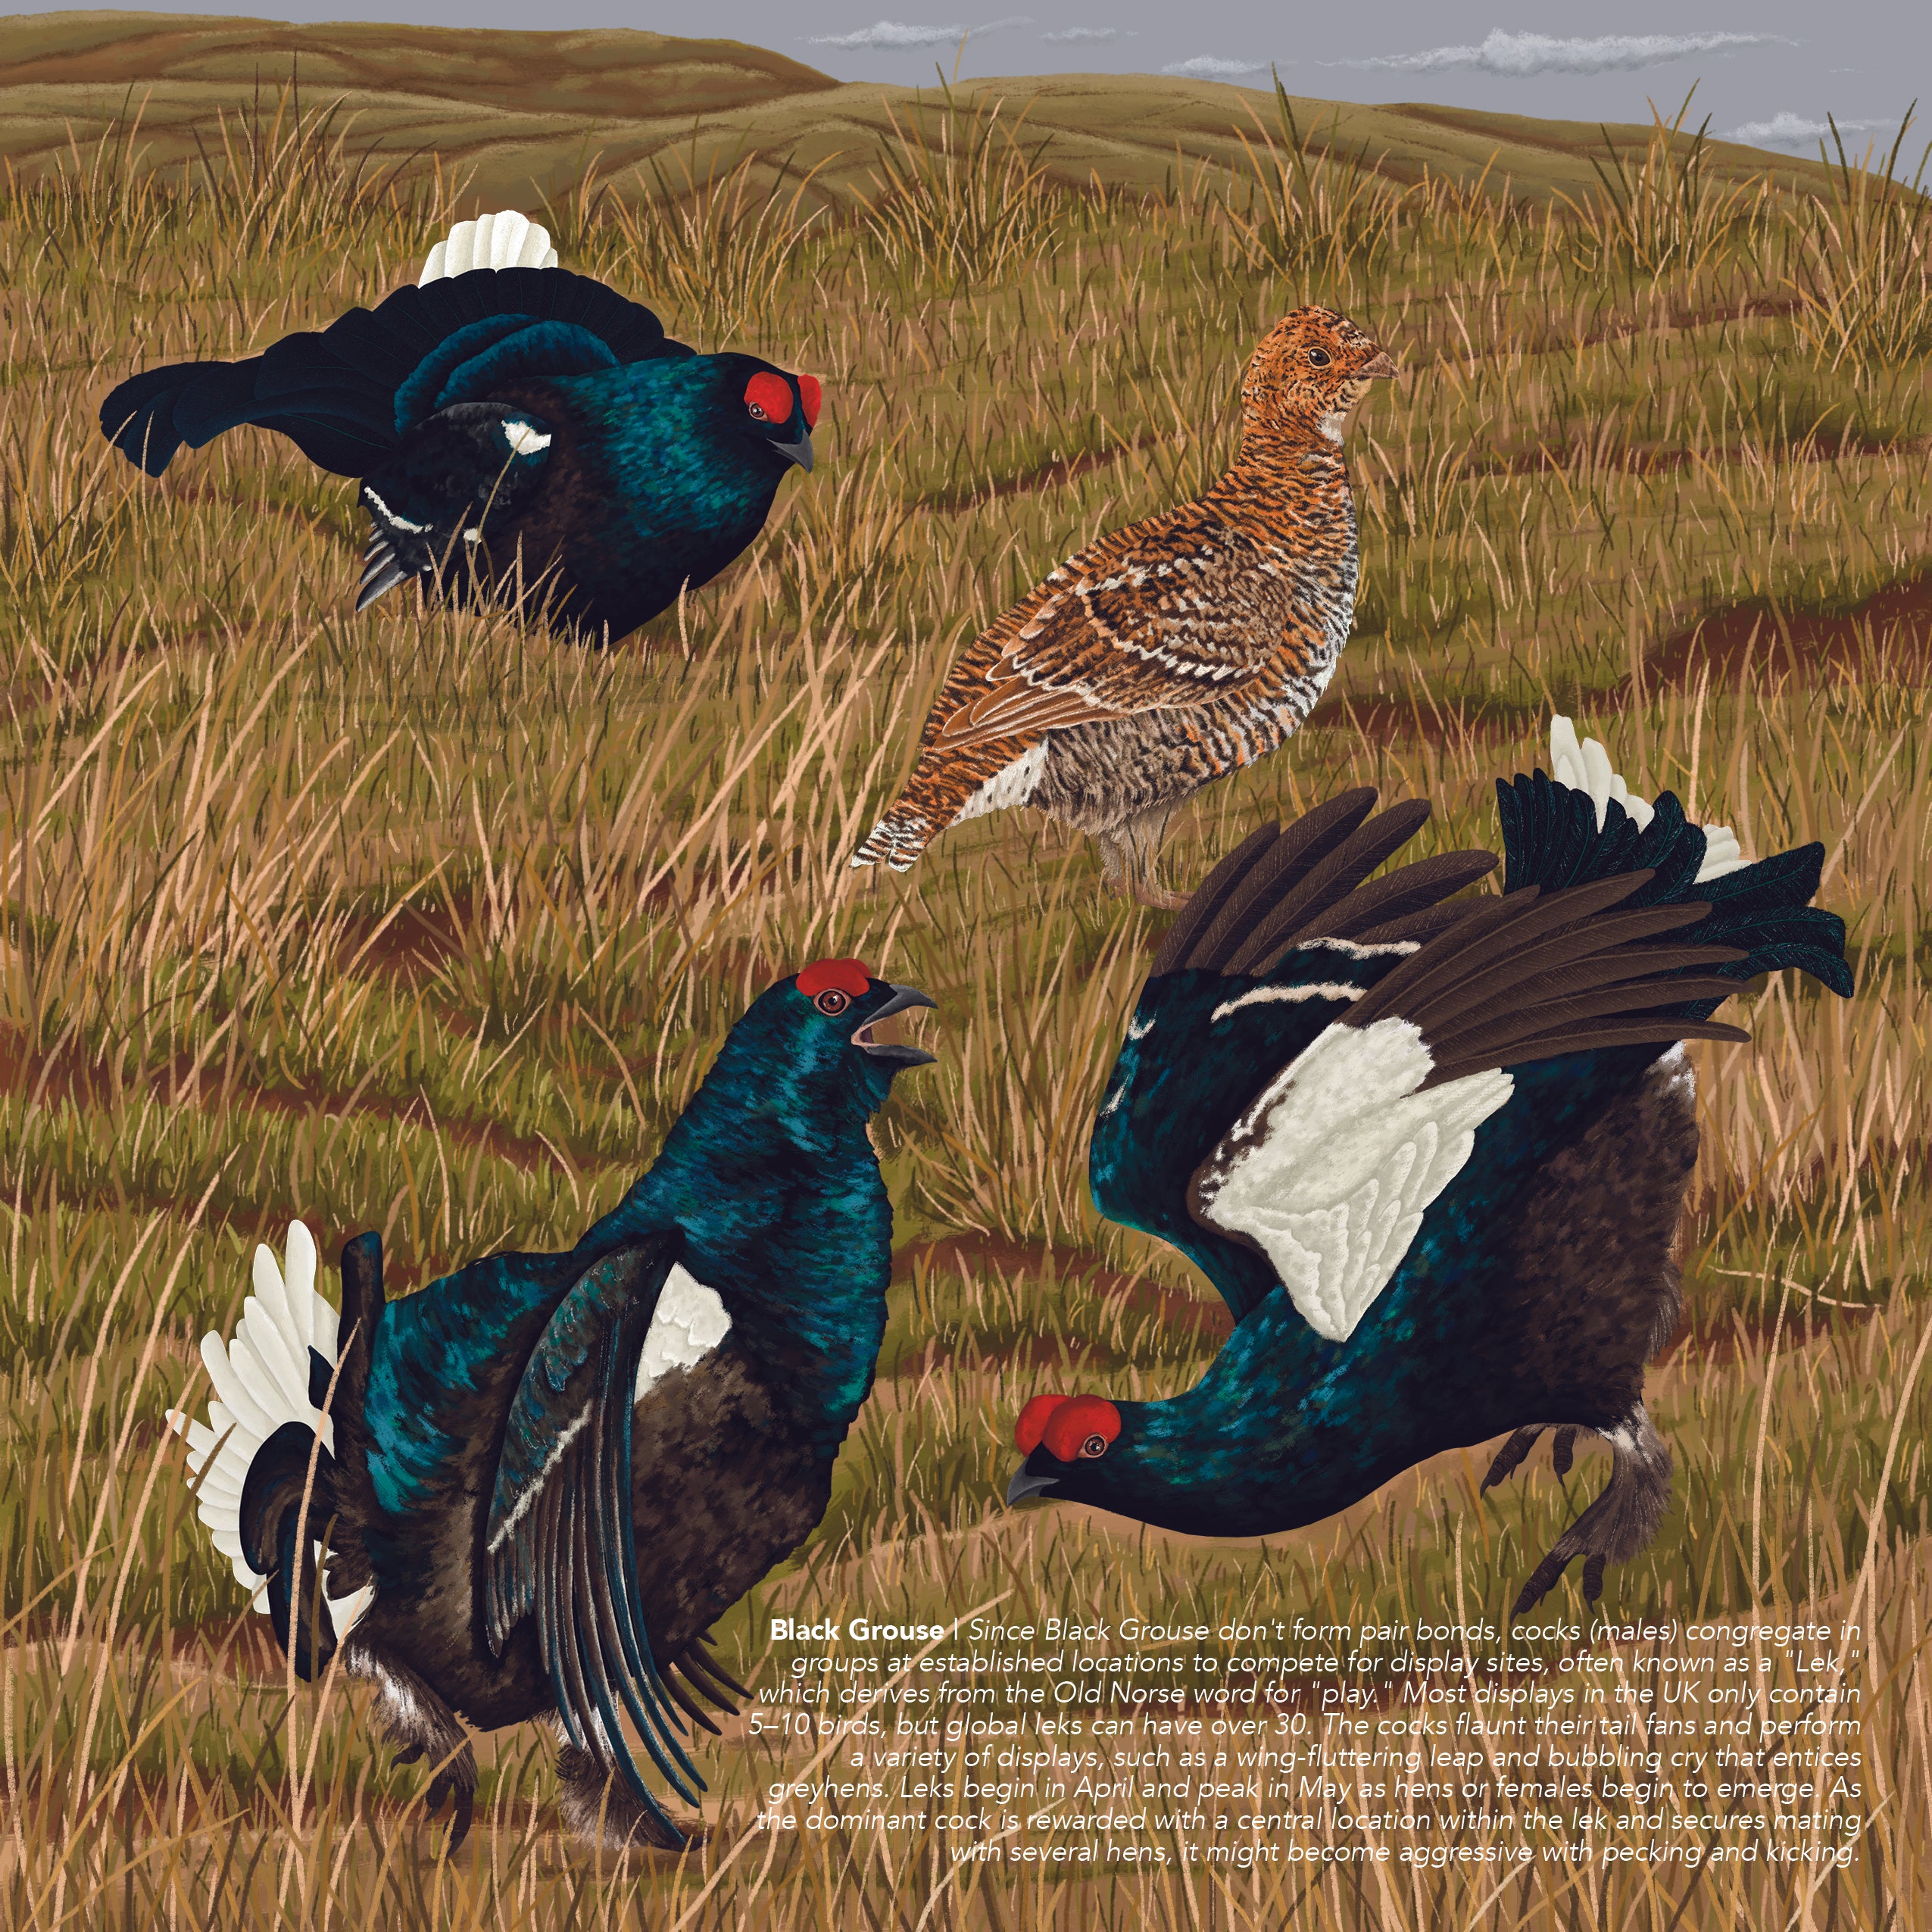 Black grouse lek illustration. male blue/black feathered birds display with jumping and flapping feathers on brown grass in front of brown speckled female. 